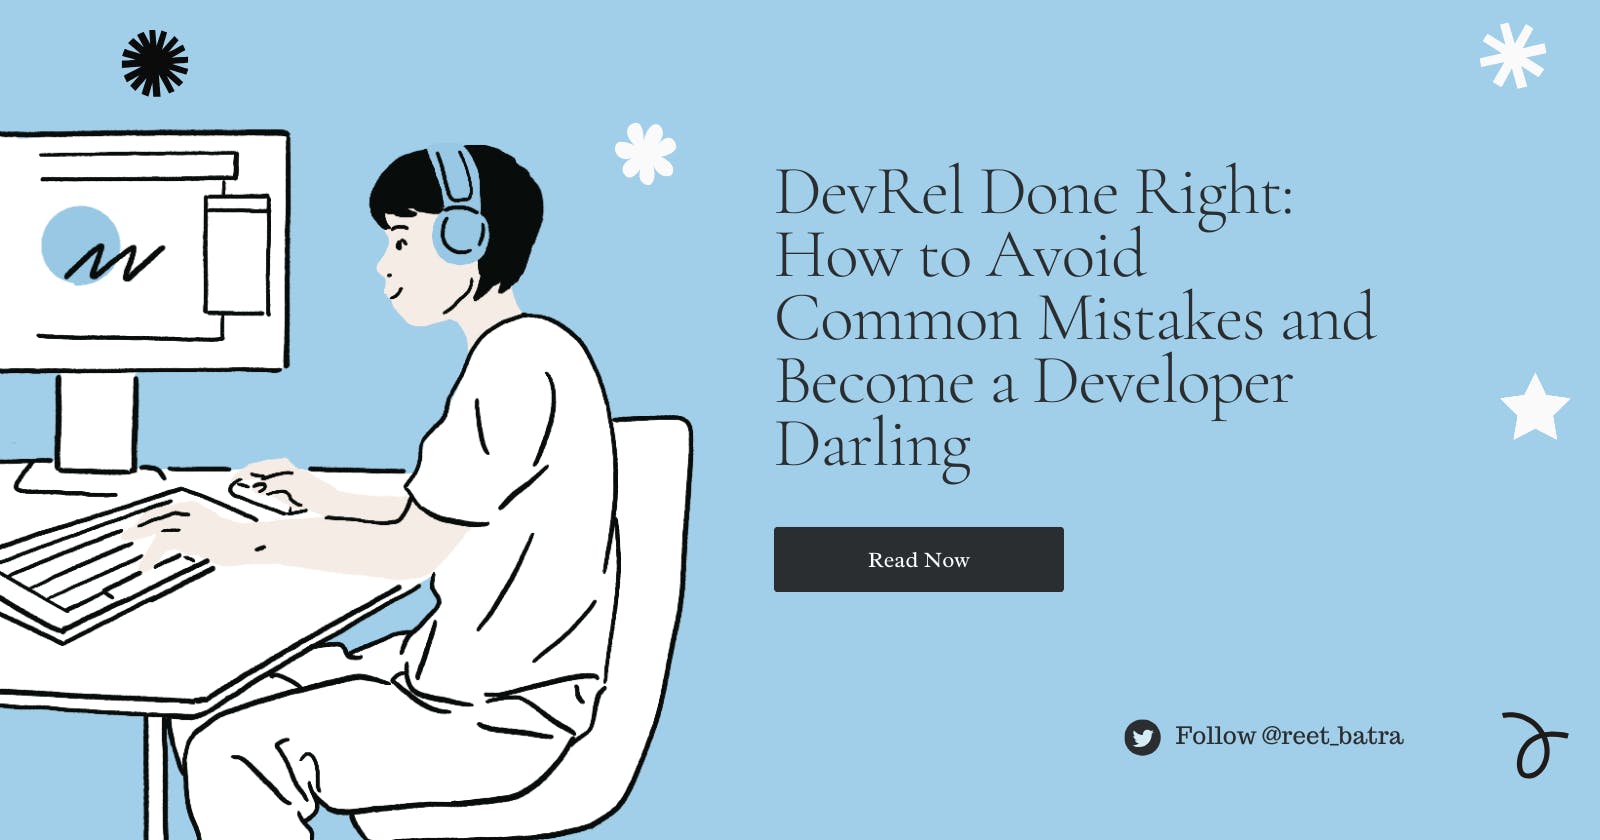 DevRel Done Right: How to Avoid Common Mistakes and Become a Developer Darling